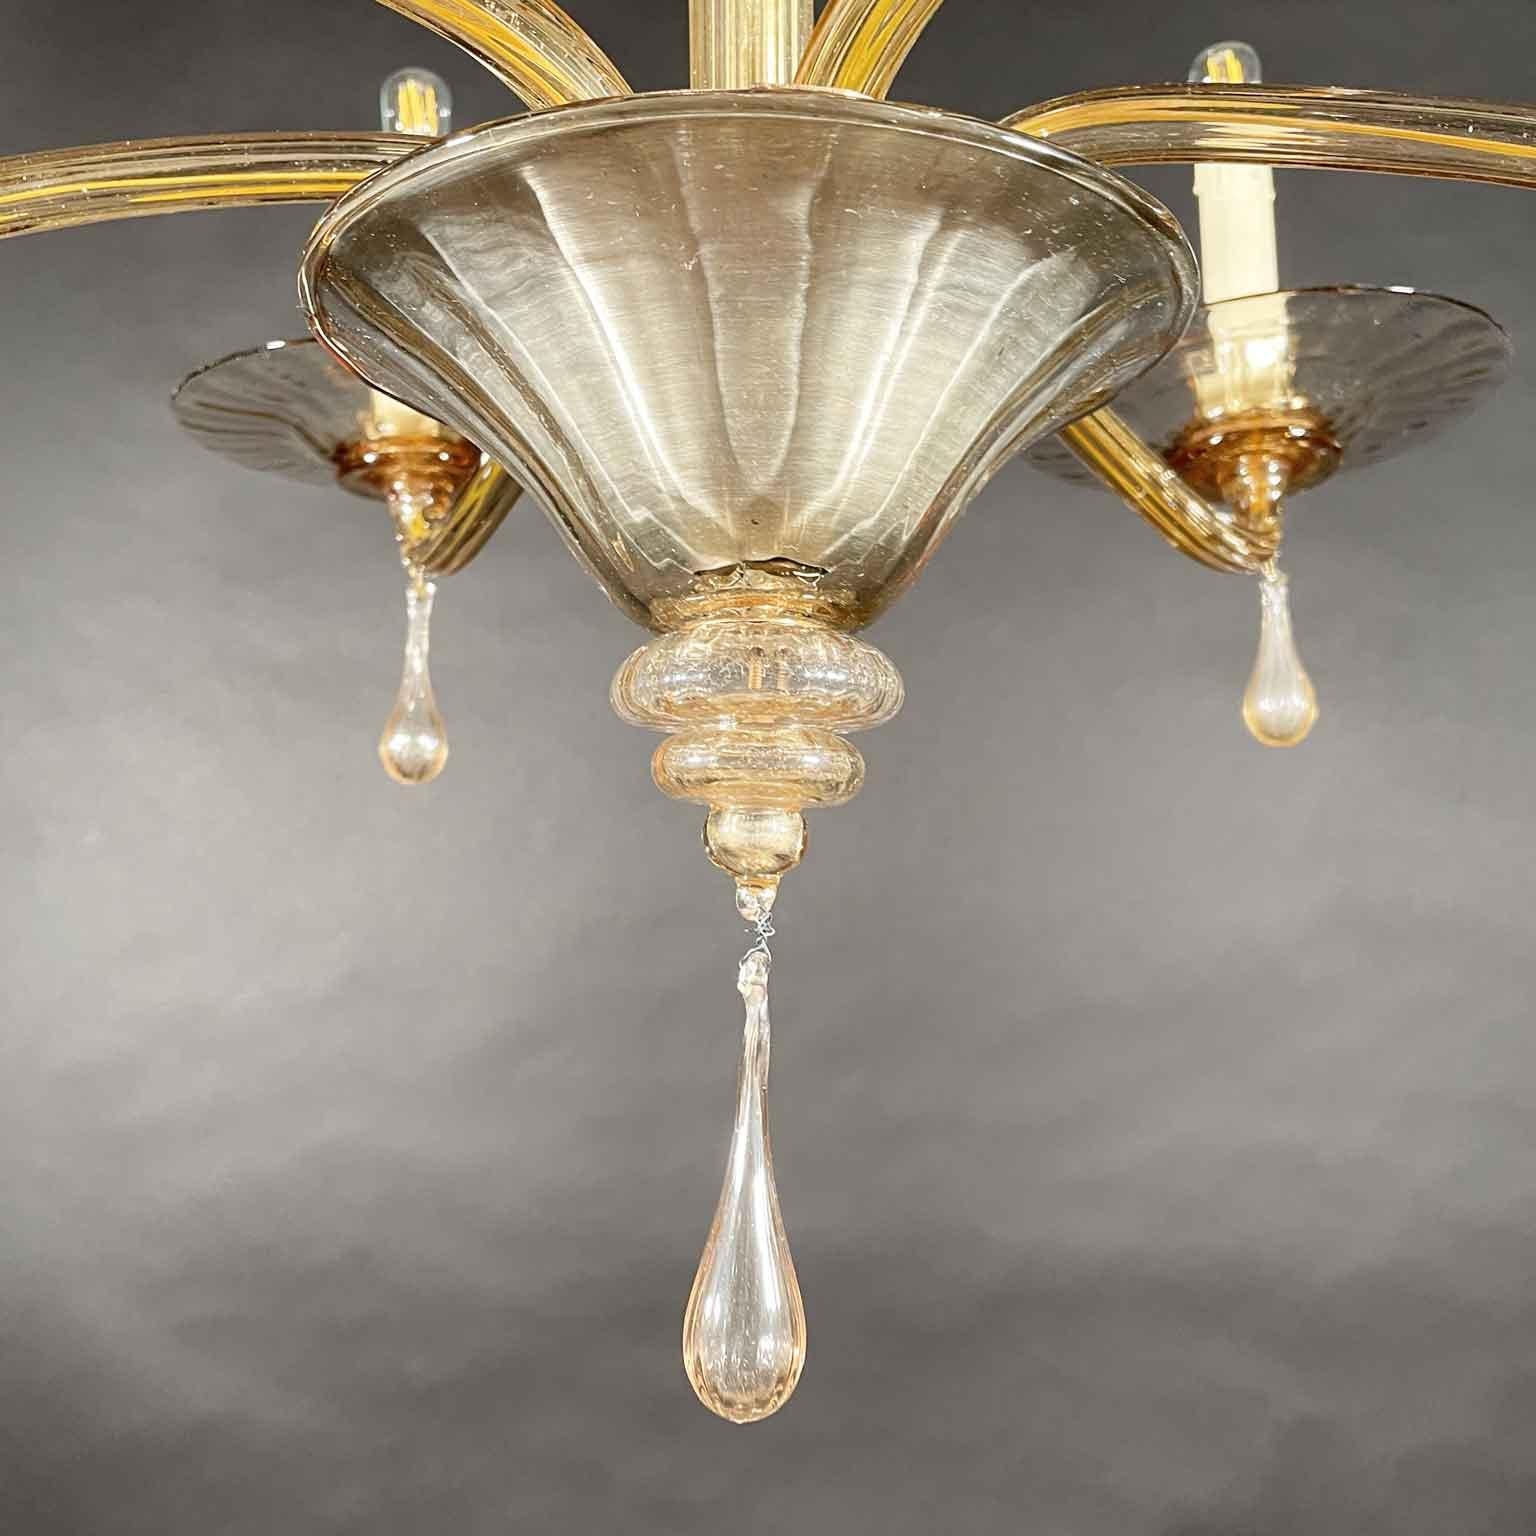 Italian 1920 Venetian Glass Murano Glass Chandelier Amber Color Smoked with Six Arms For Sale